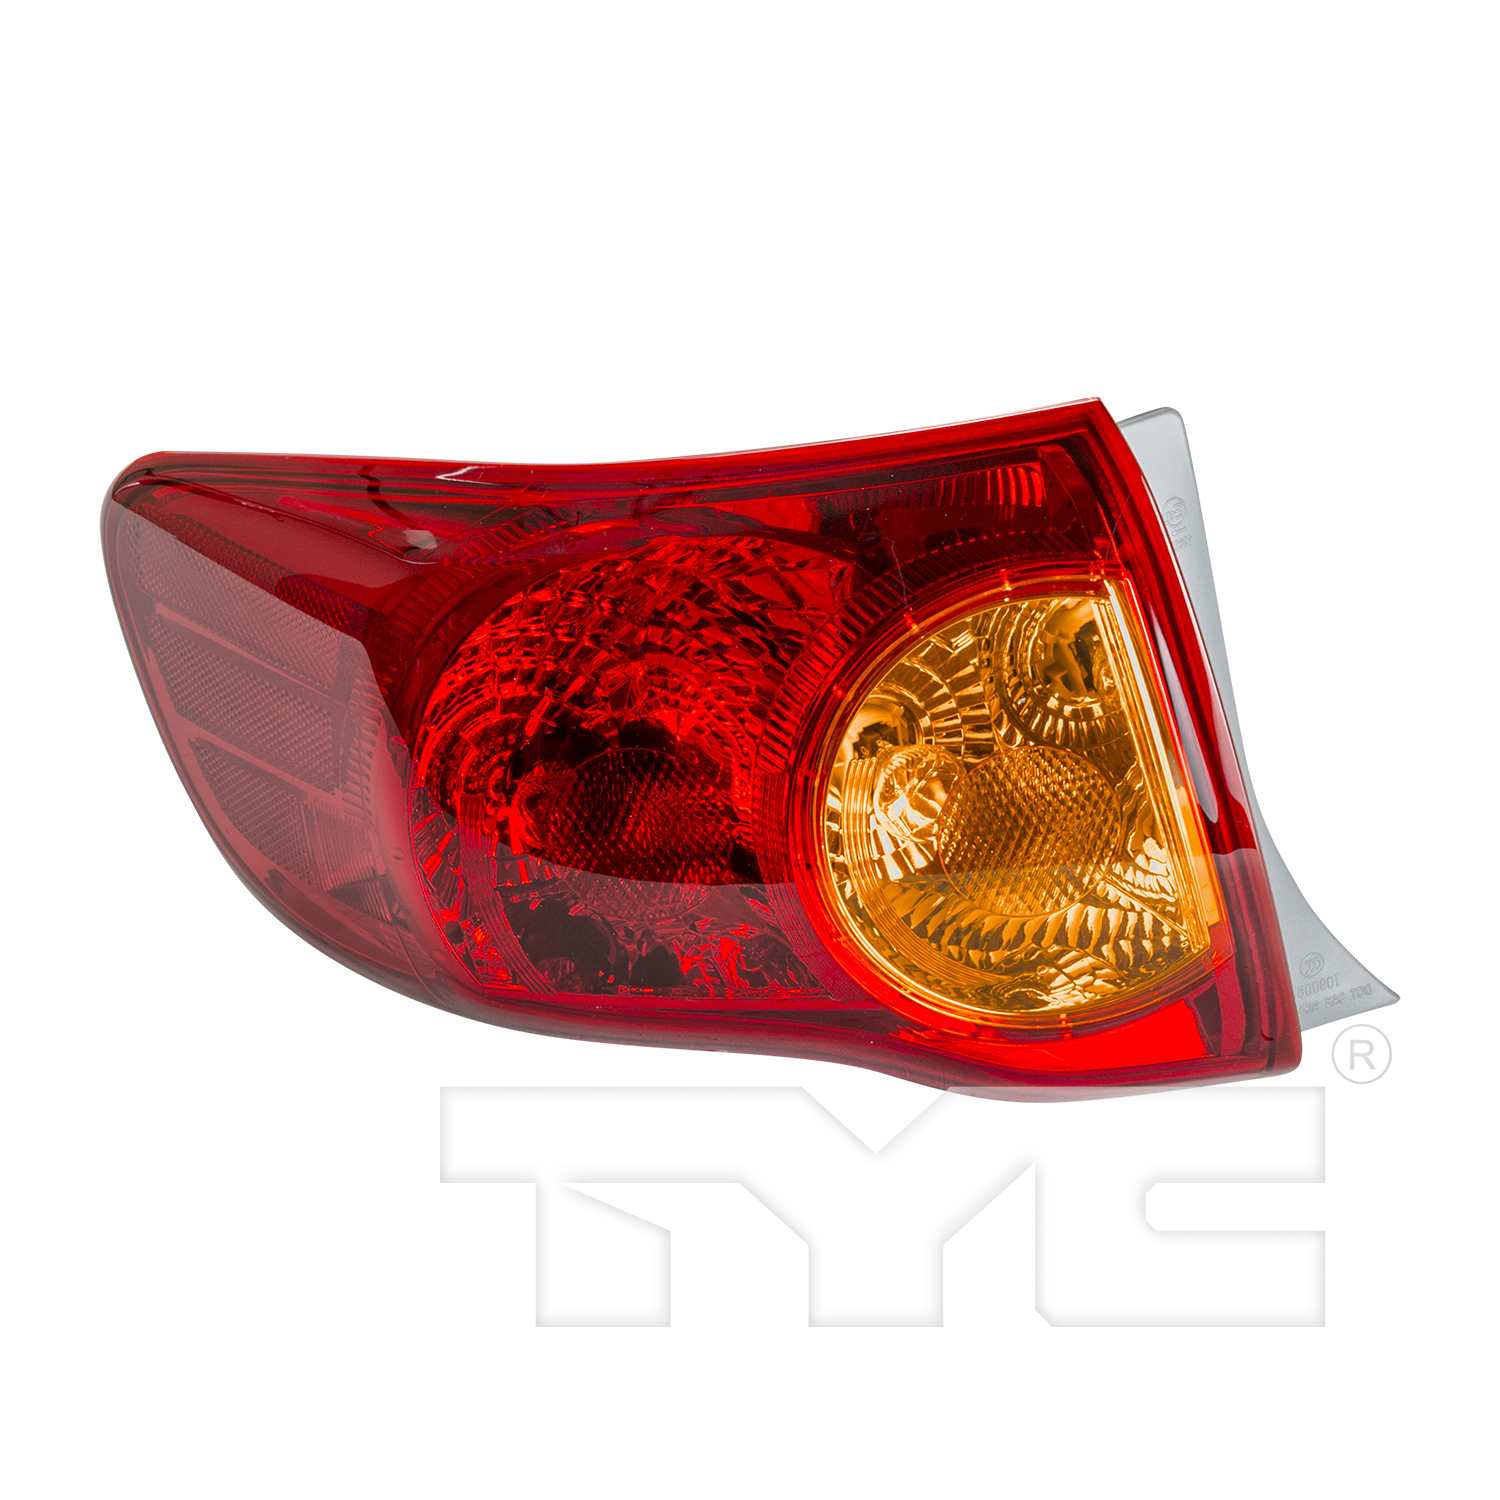 Aftermarket TAILLIGHTS for TOYOTA - COROLLA, COROLLA,09-10,LT Taillamp assy